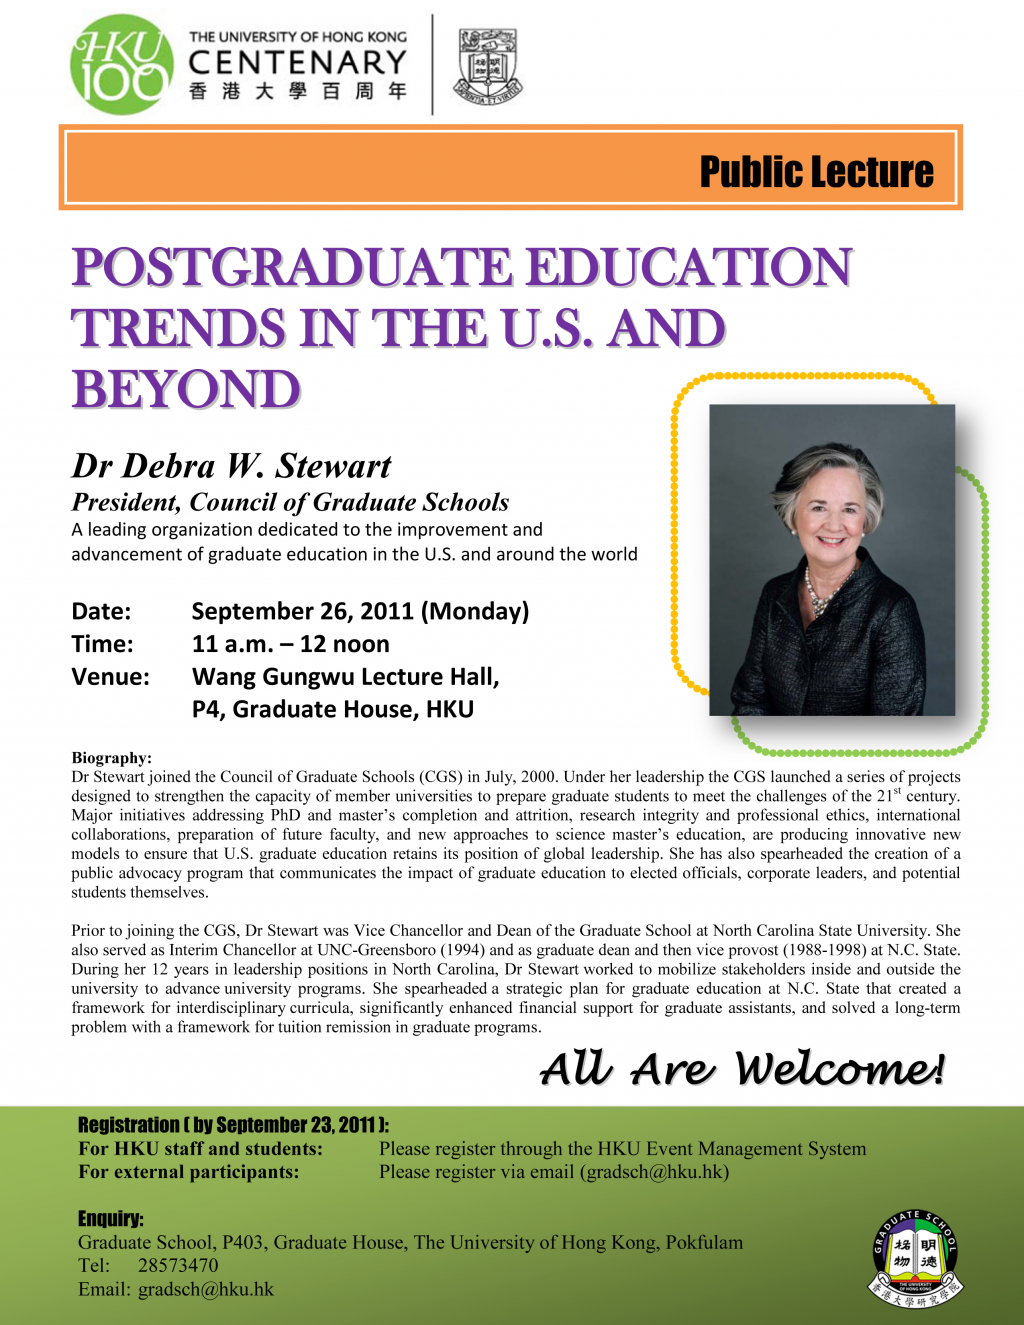 “Postgraduate Education Trends in the U.S. and Beyond” – Public Lecture by Dr Debra W. Stewart